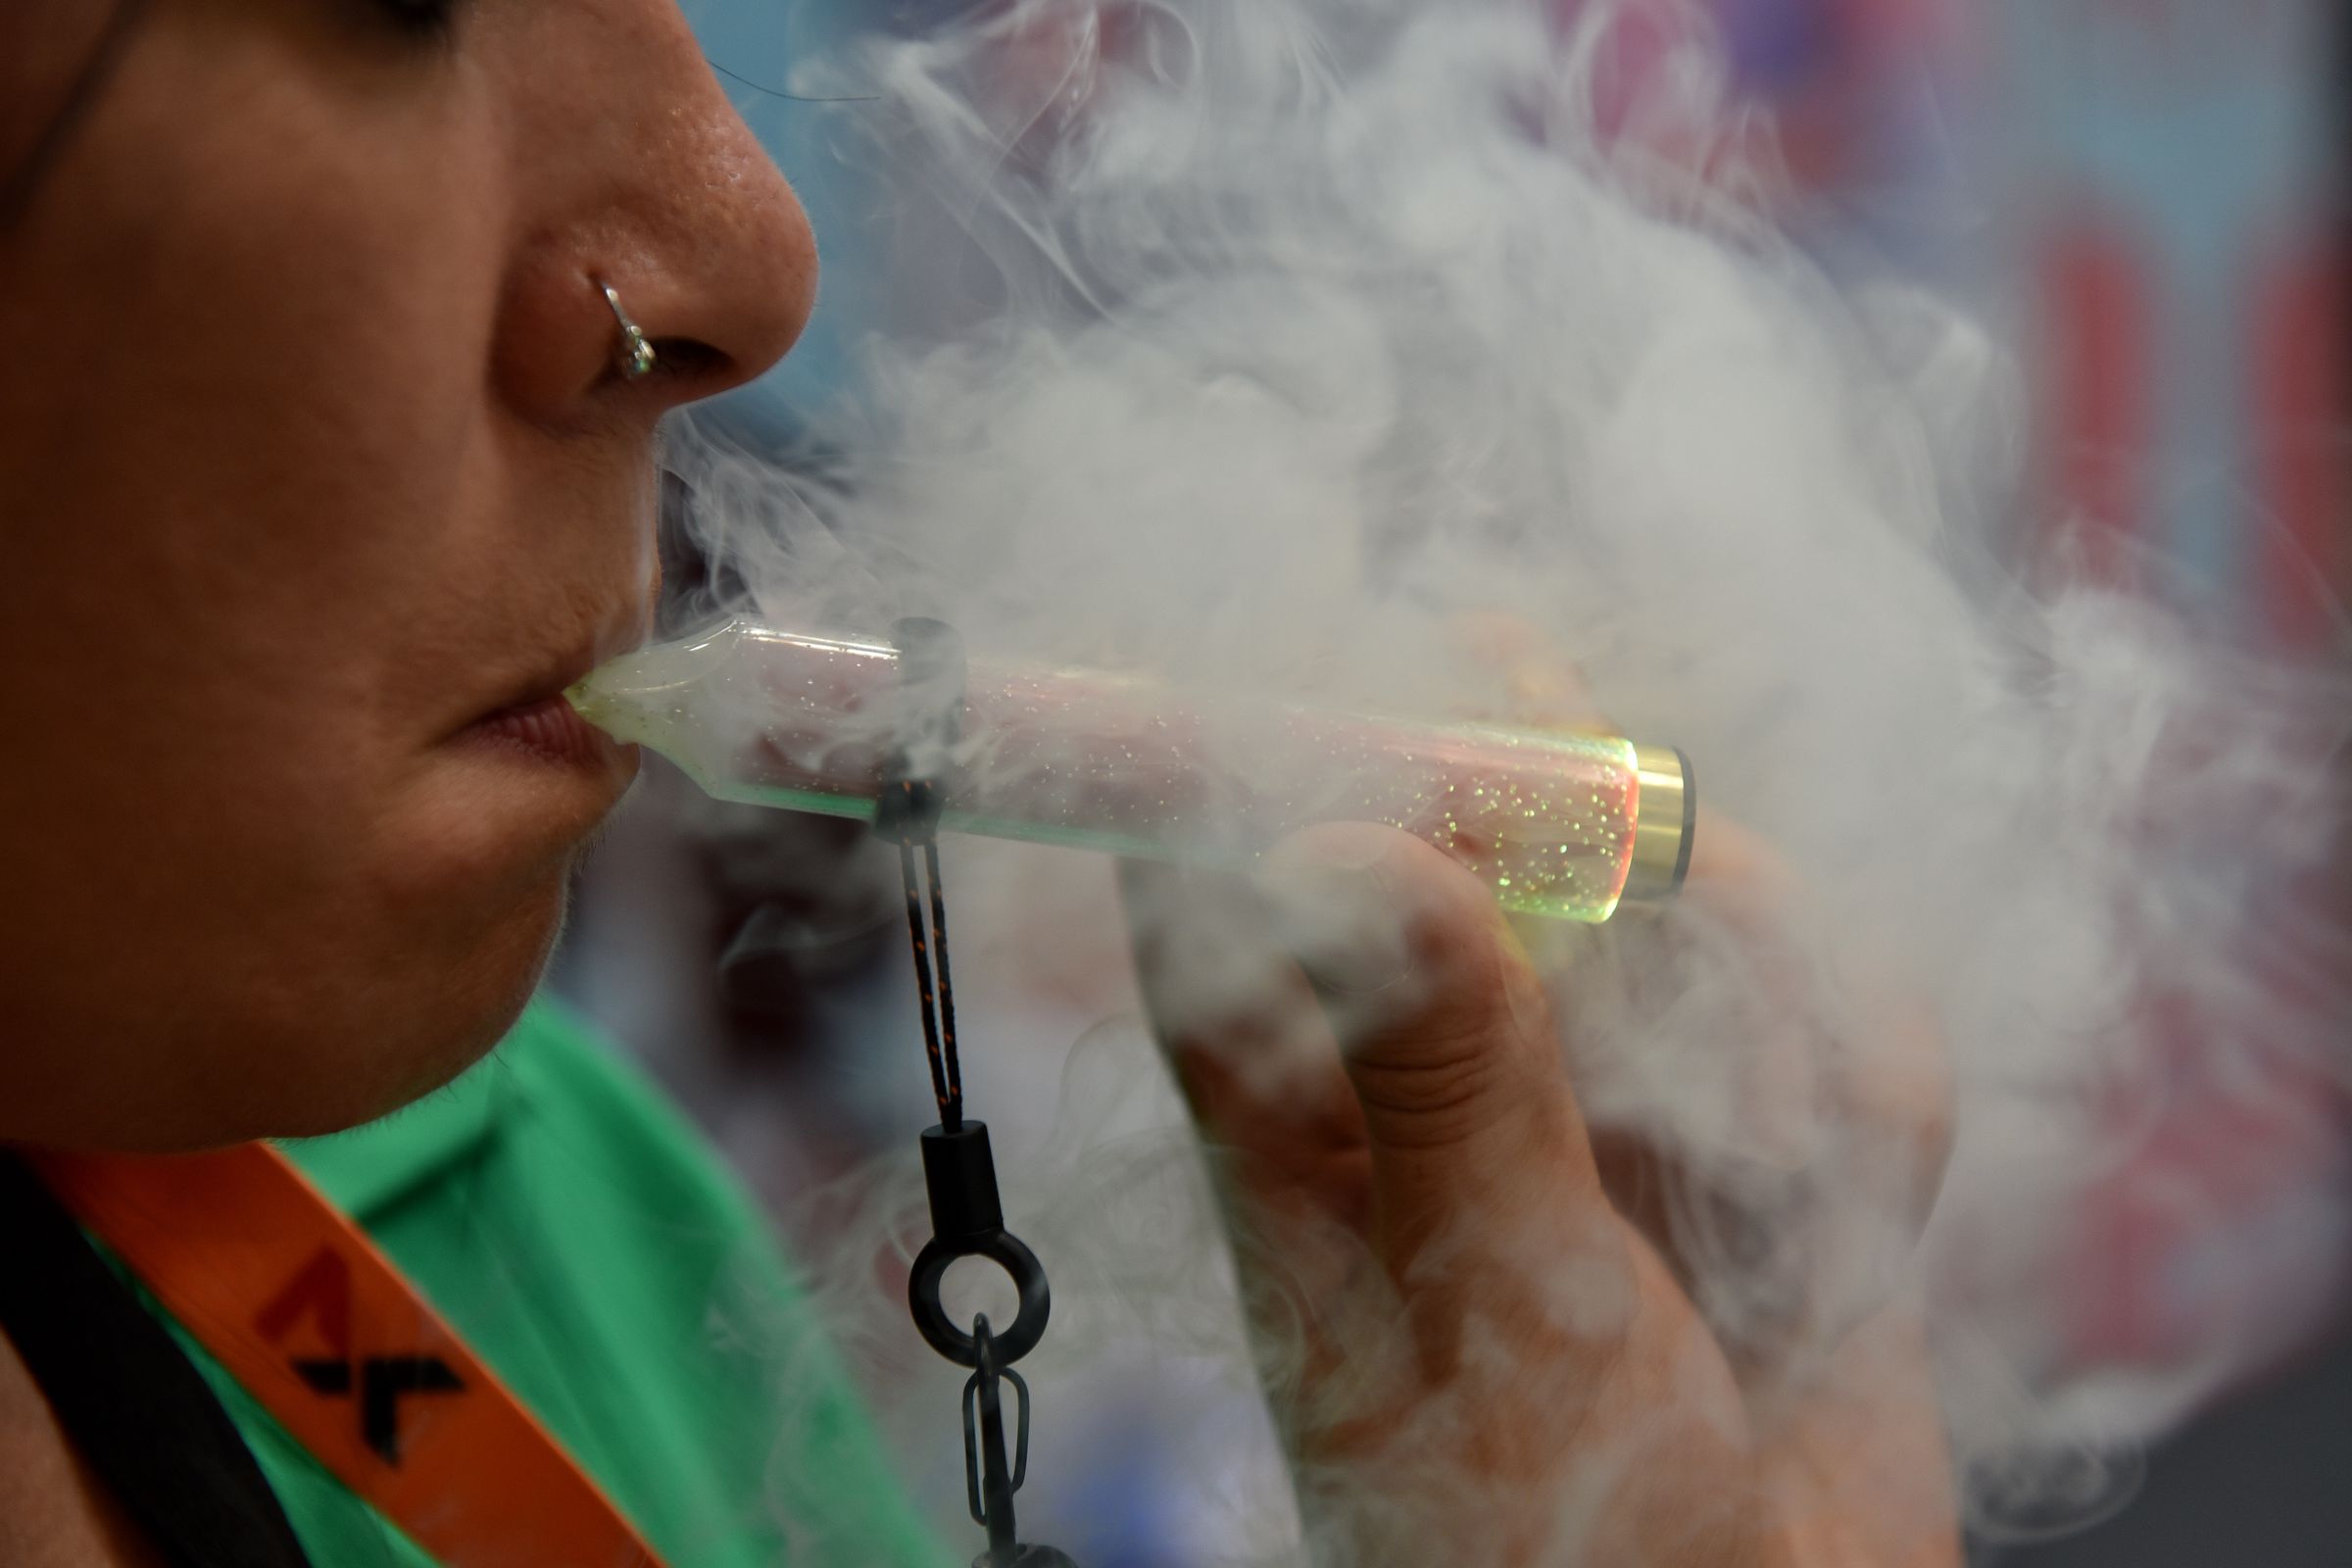 A woman breathes out a cloud of smoke from a vaporizer.